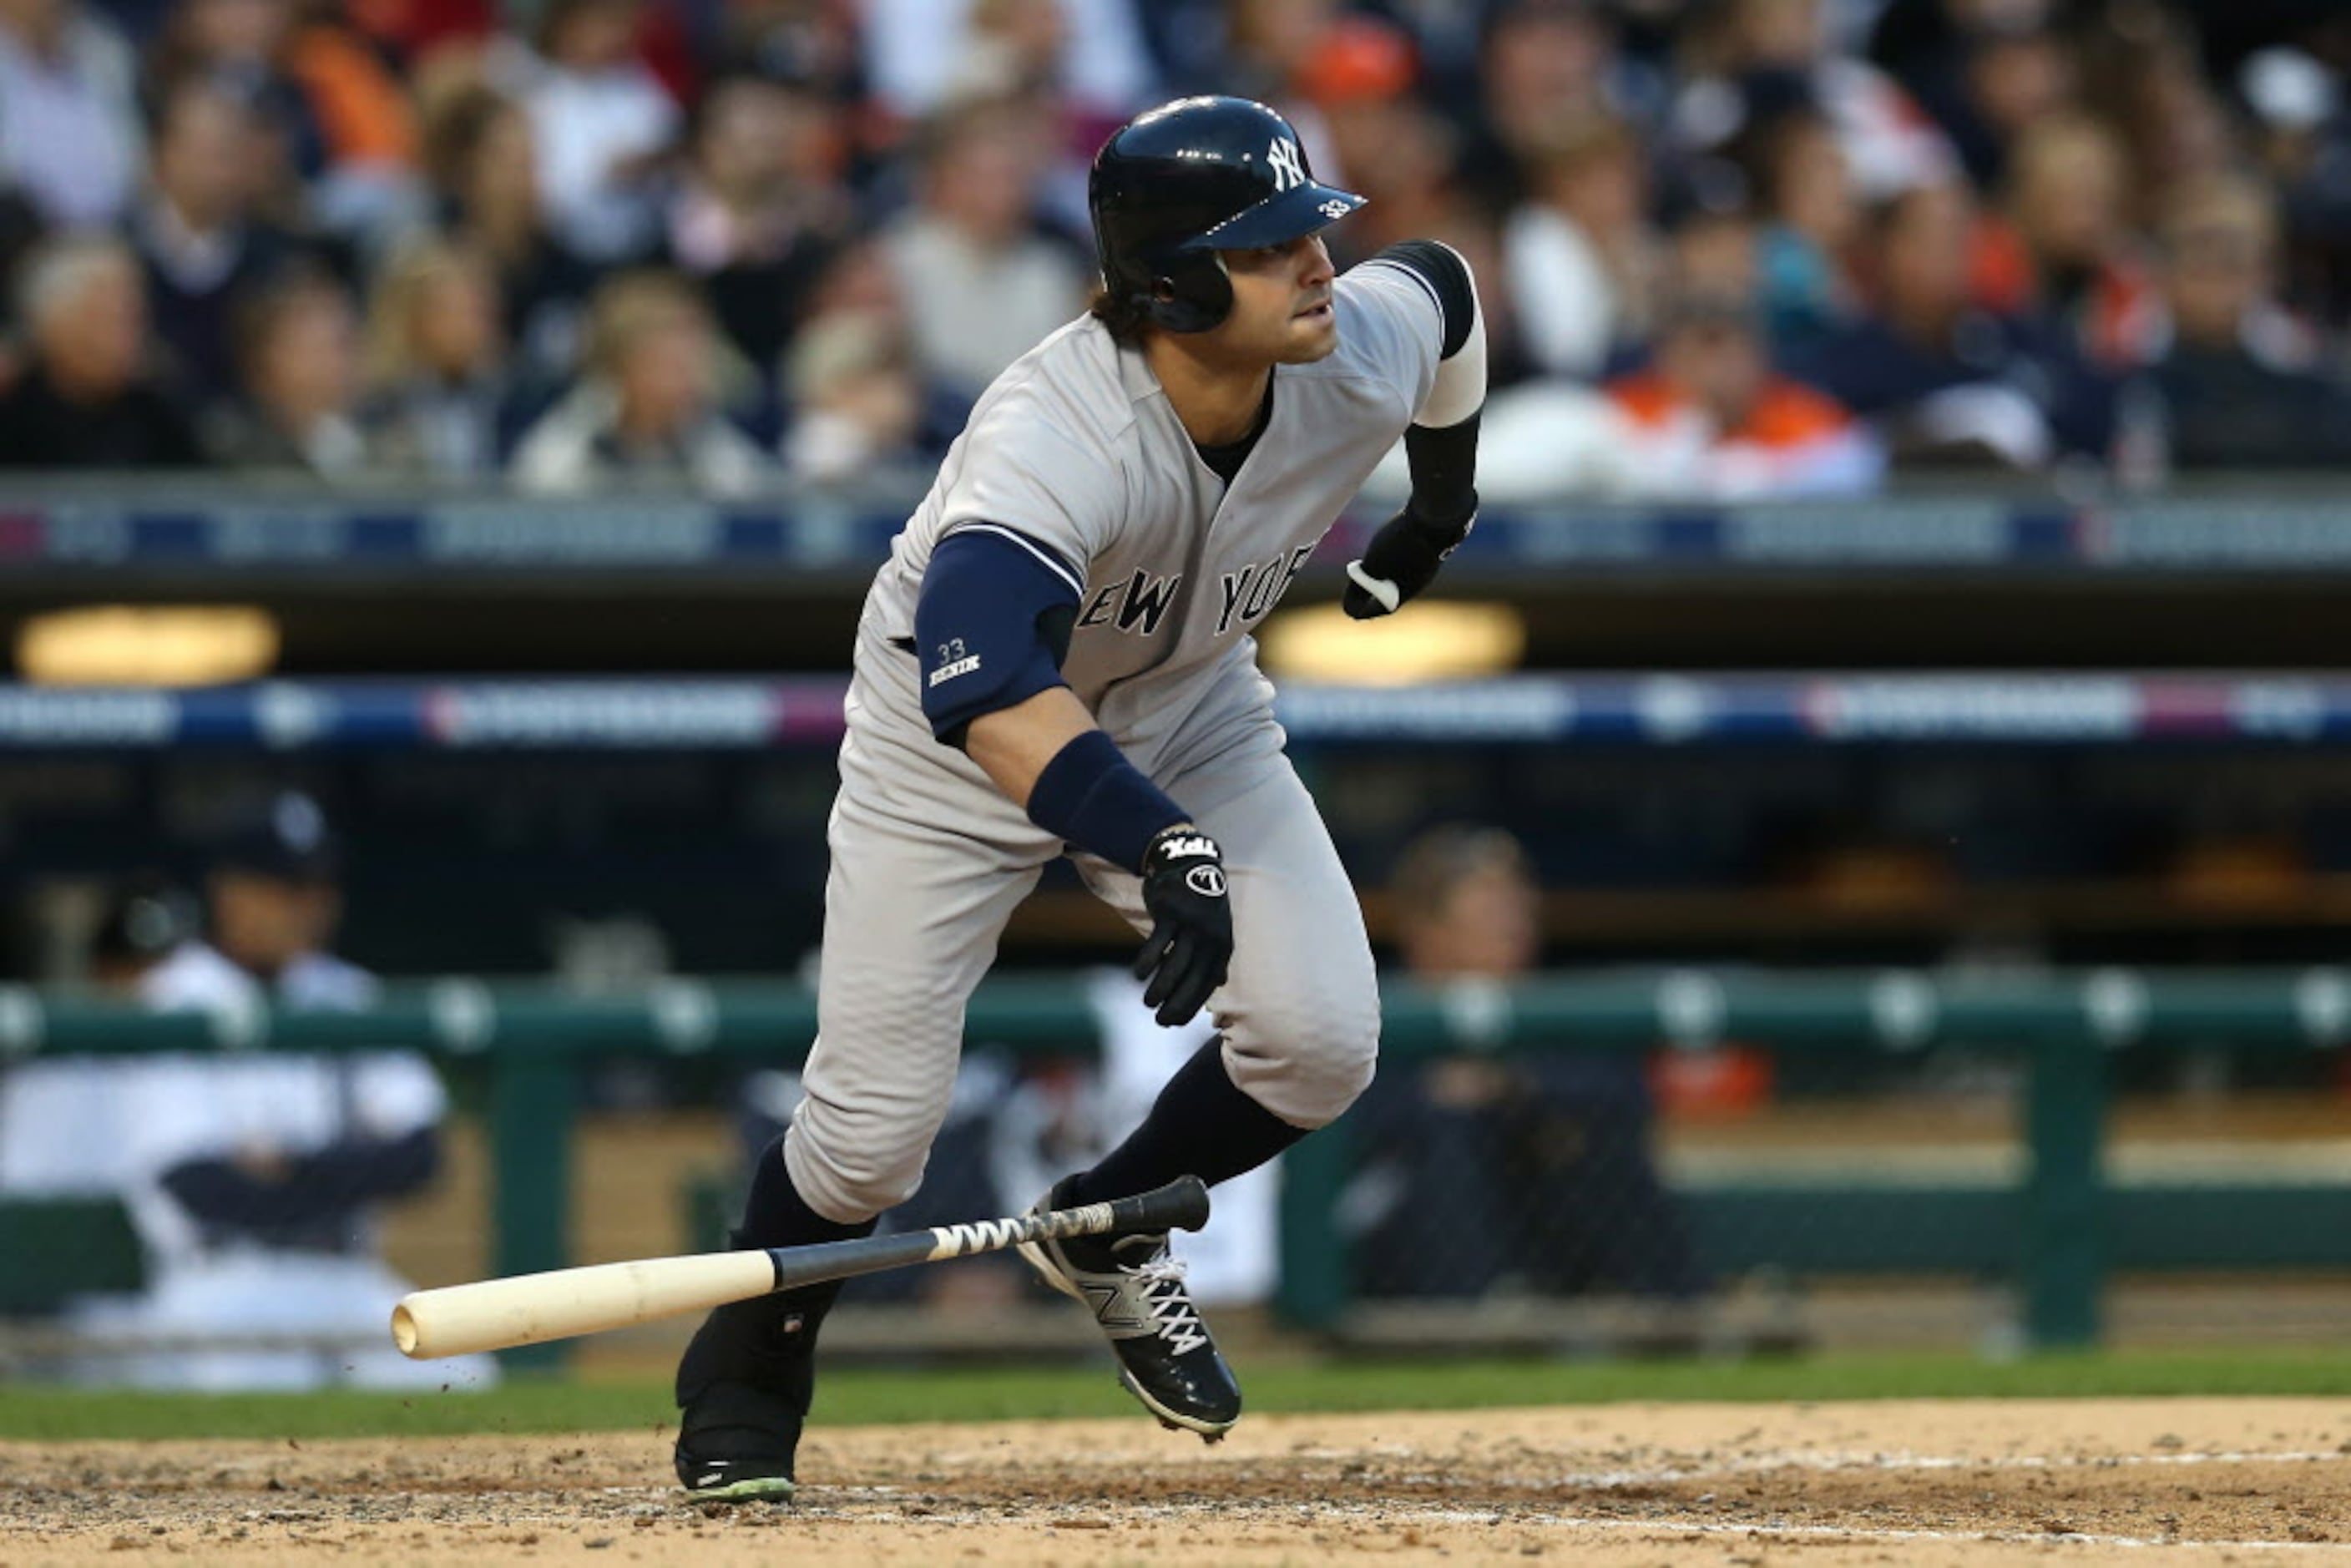 Who is Nick Swisher Wife? Know Everything About Nick Swisher - News